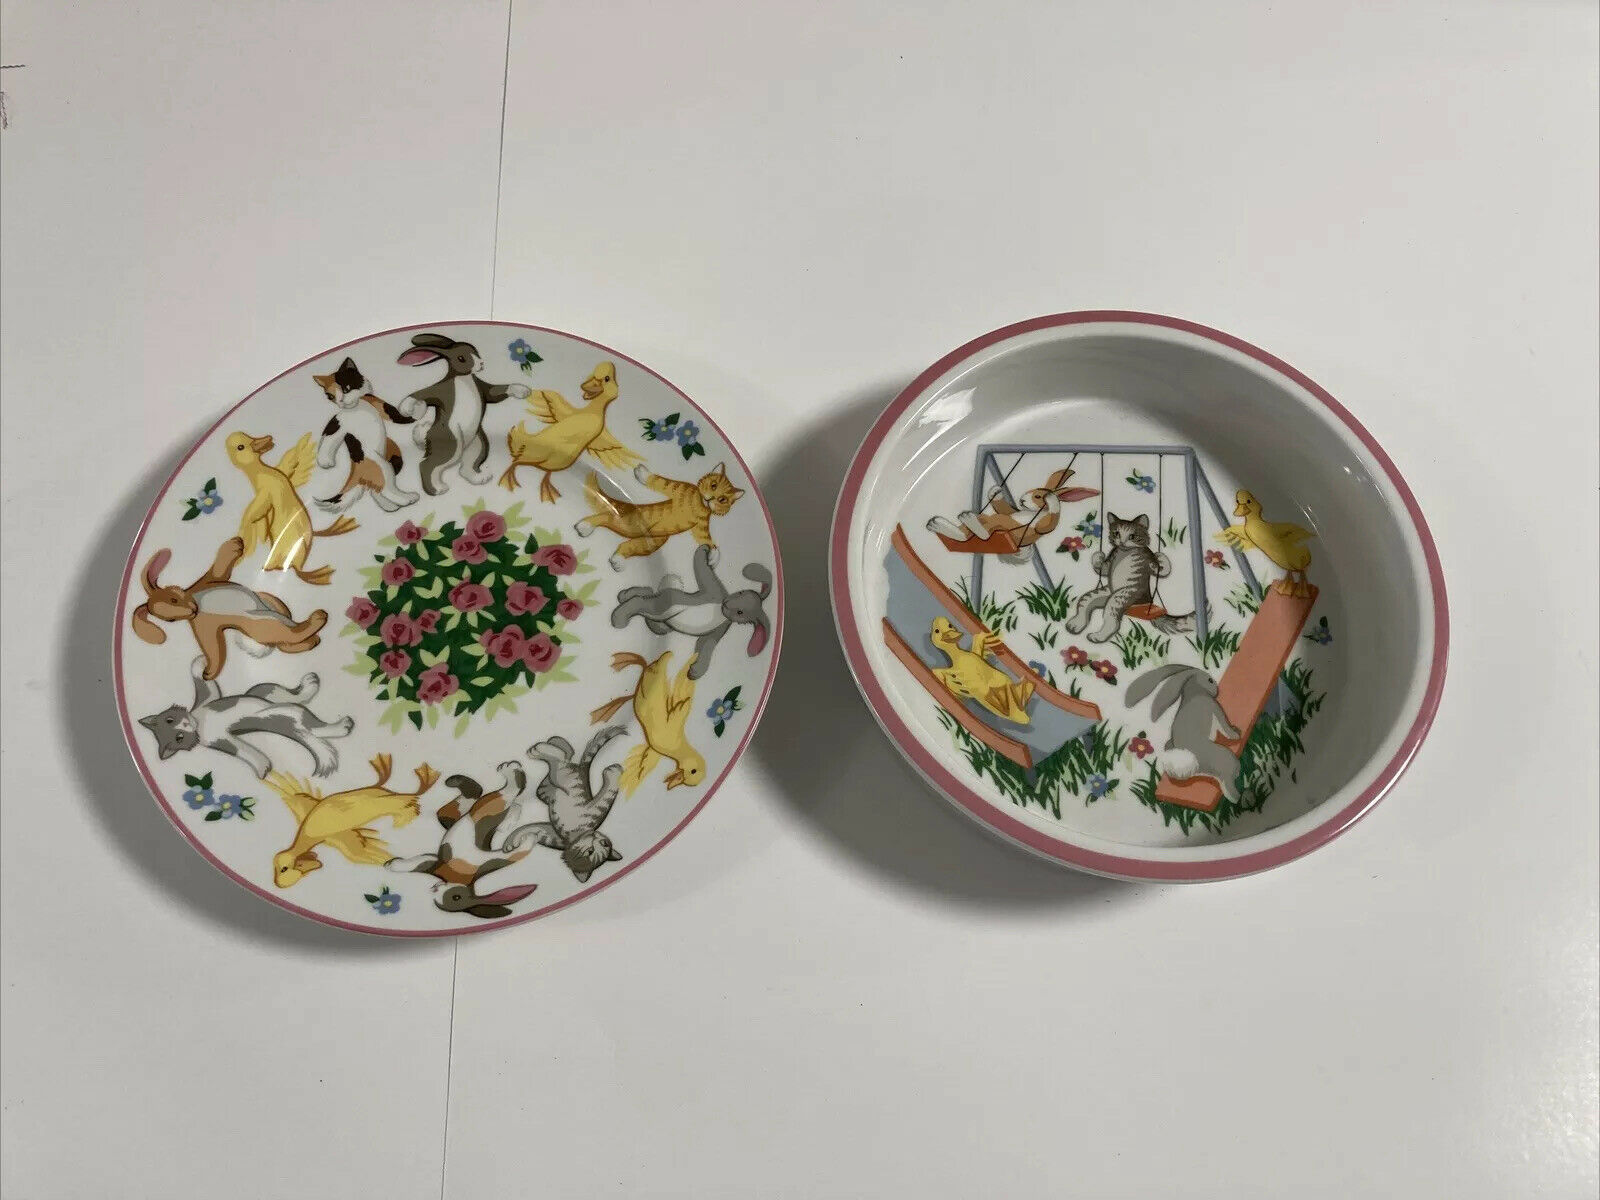 Vintage Japan TIFFANY & Co Tiffany Playground Porcelain Plate and Bowl